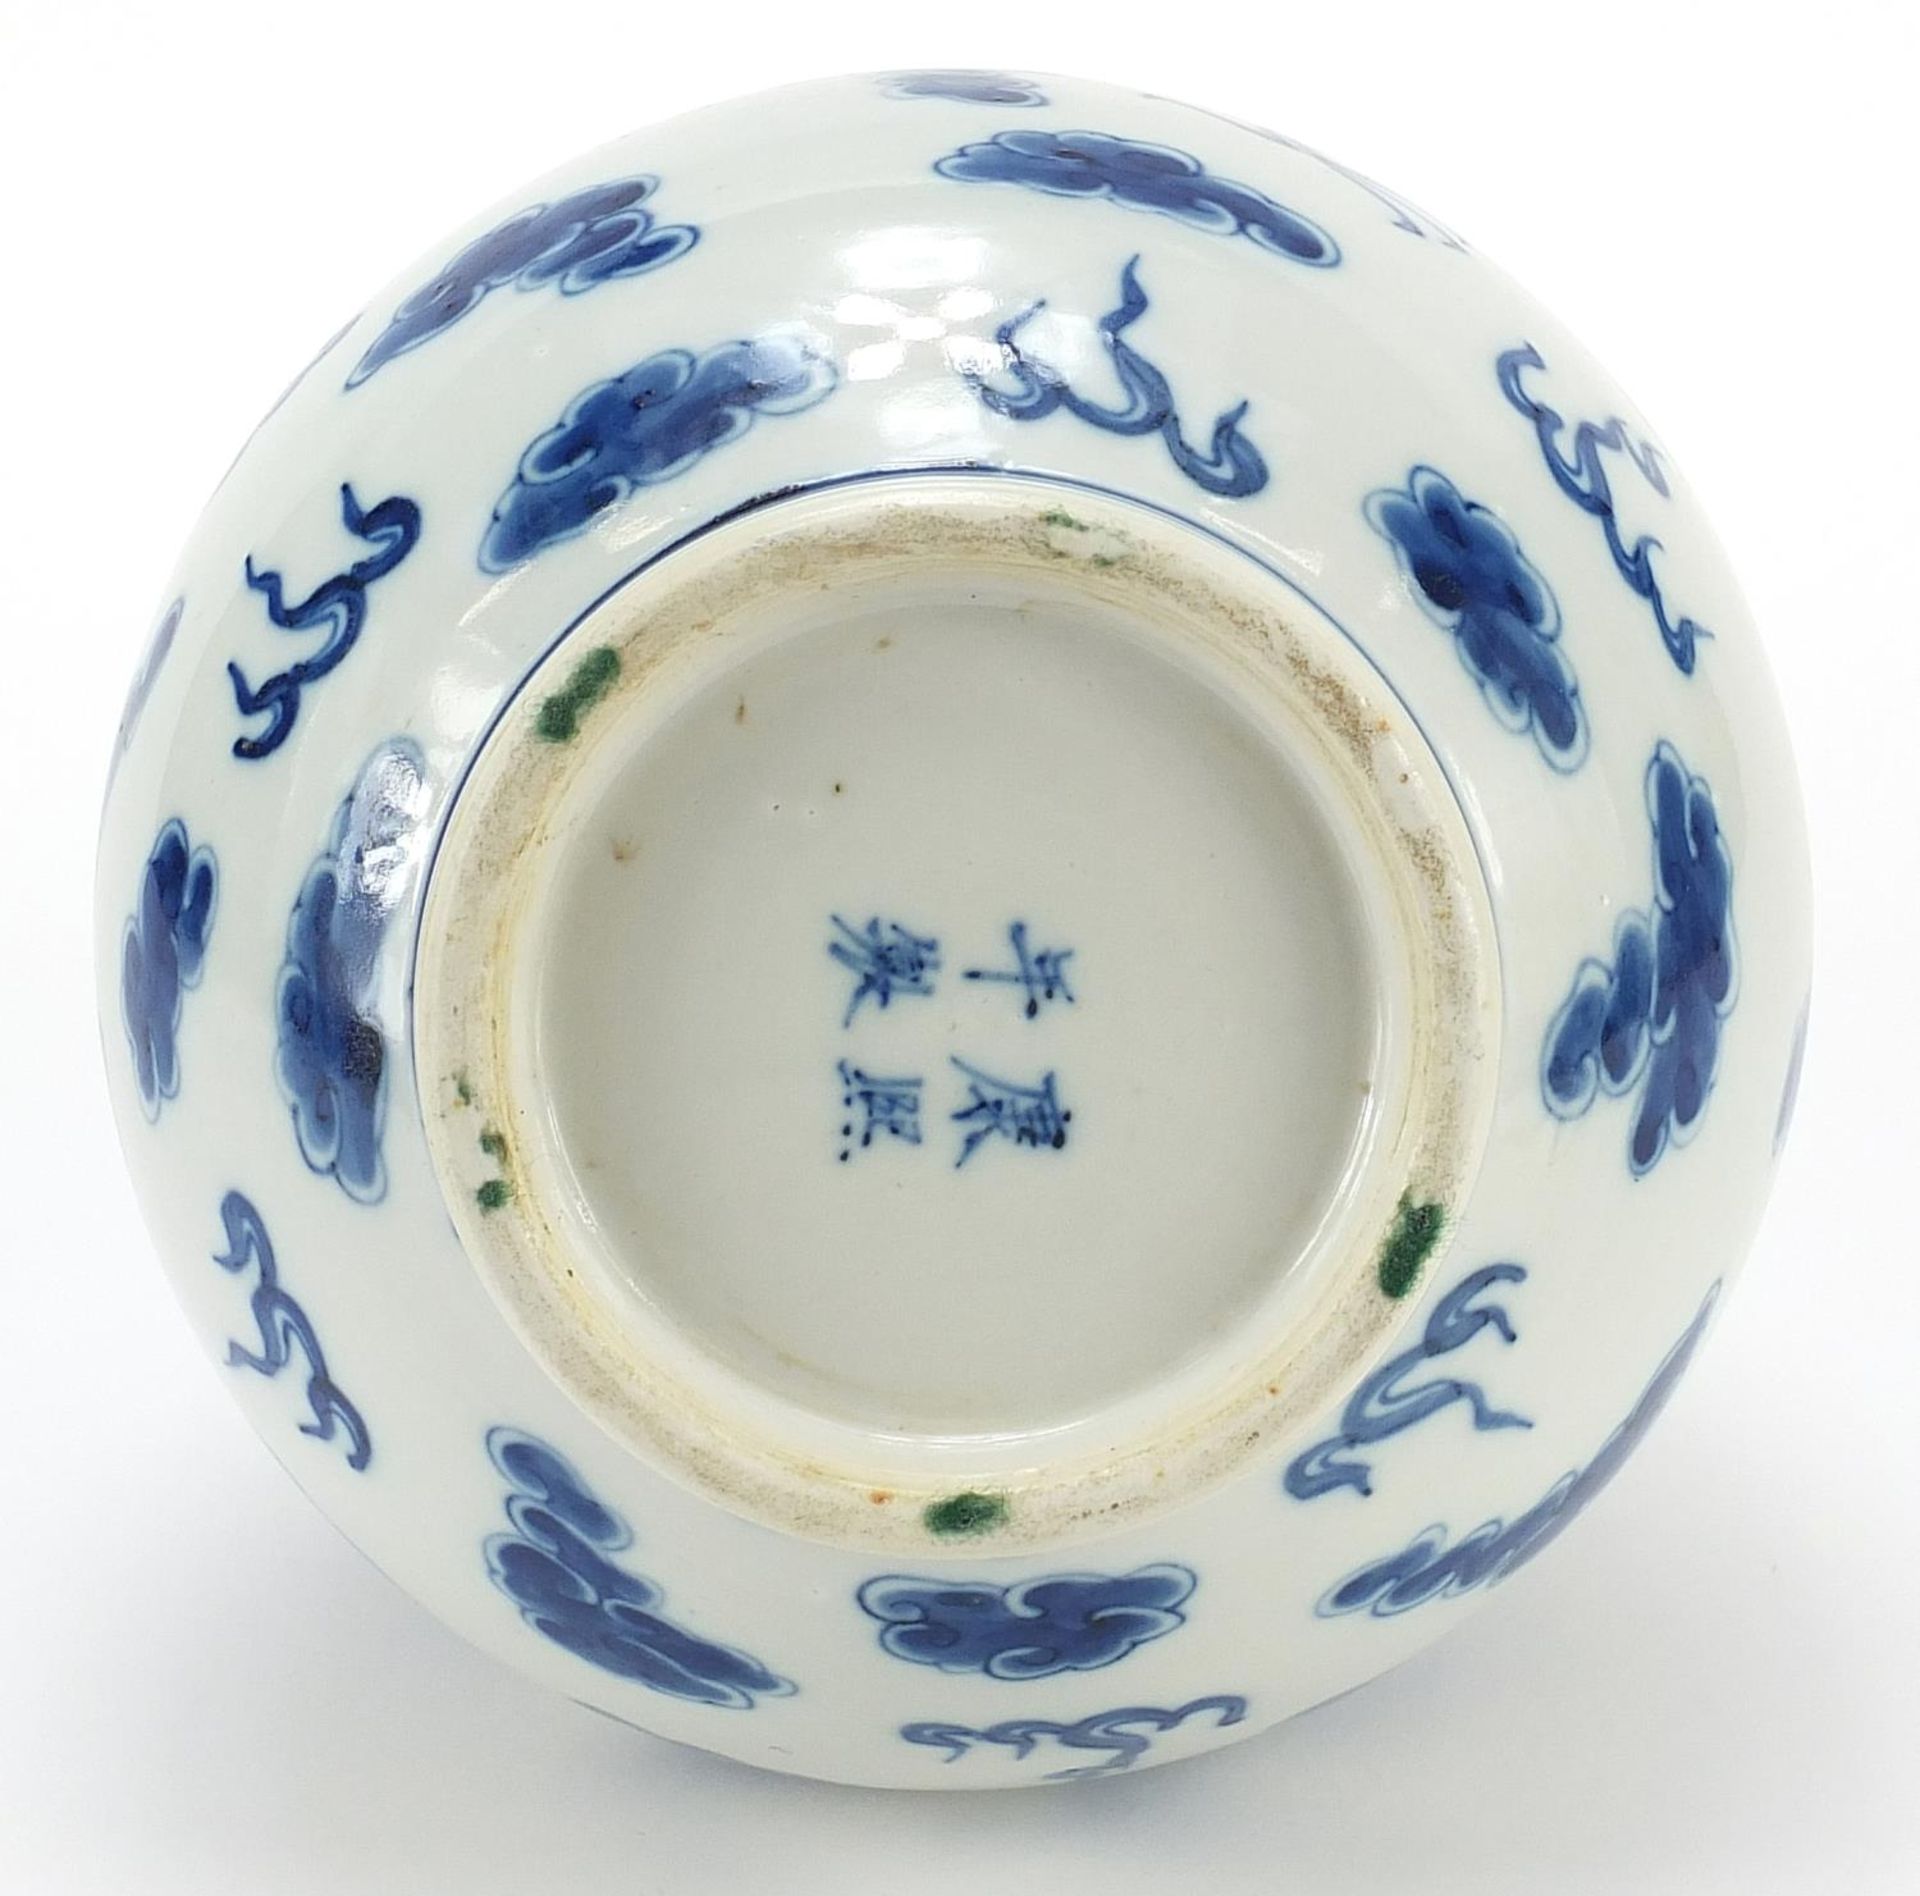 Large Chinese blue and white porcelain vase hand painted with two dragons chasing a flaming pearl - Image 3 of 3